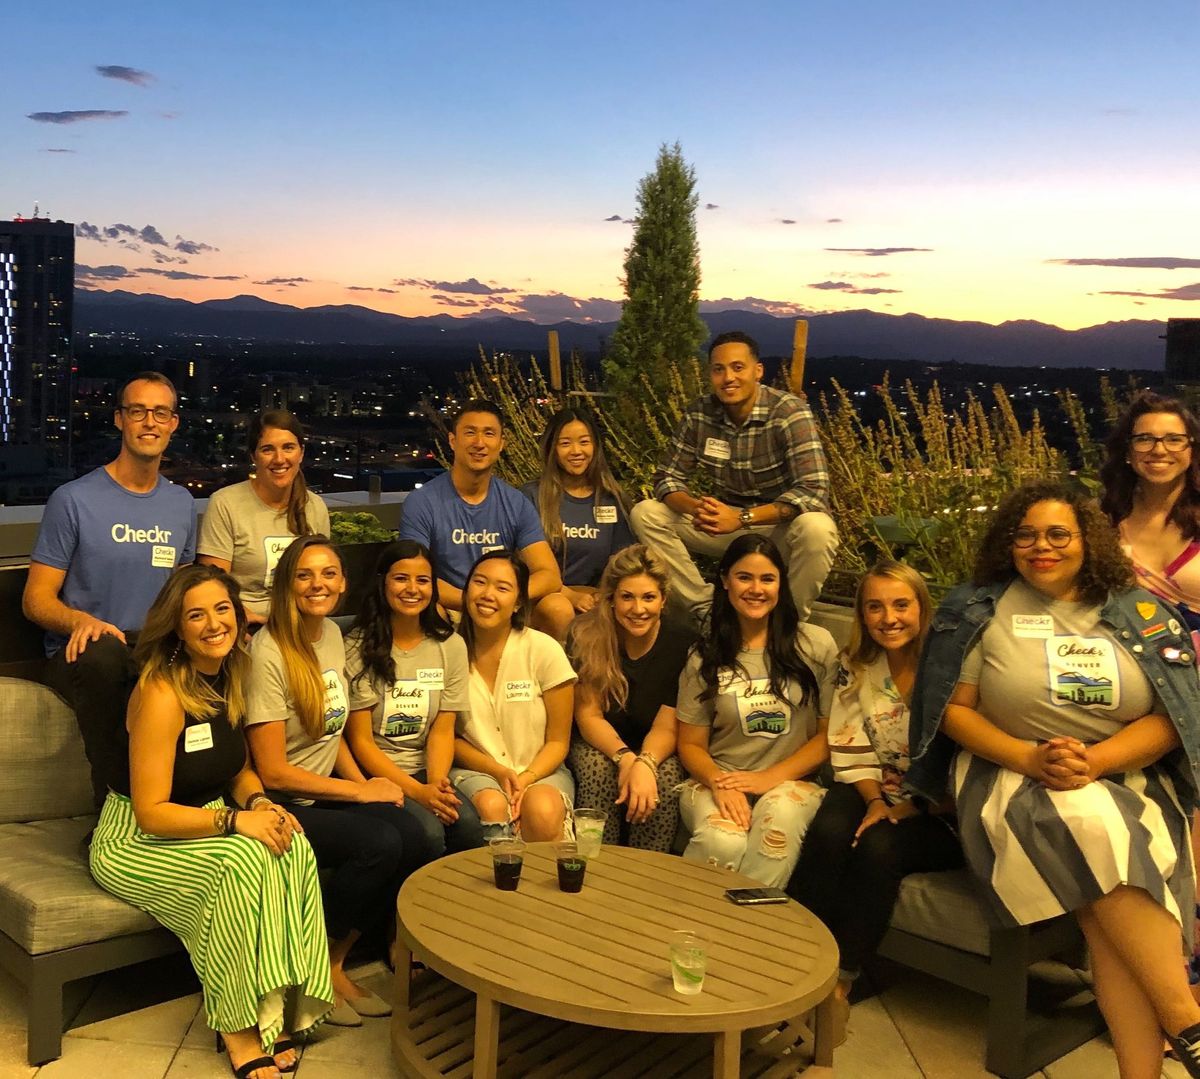 A Look Back at Our Event with Checkr's Women Sales Leaders in Denver